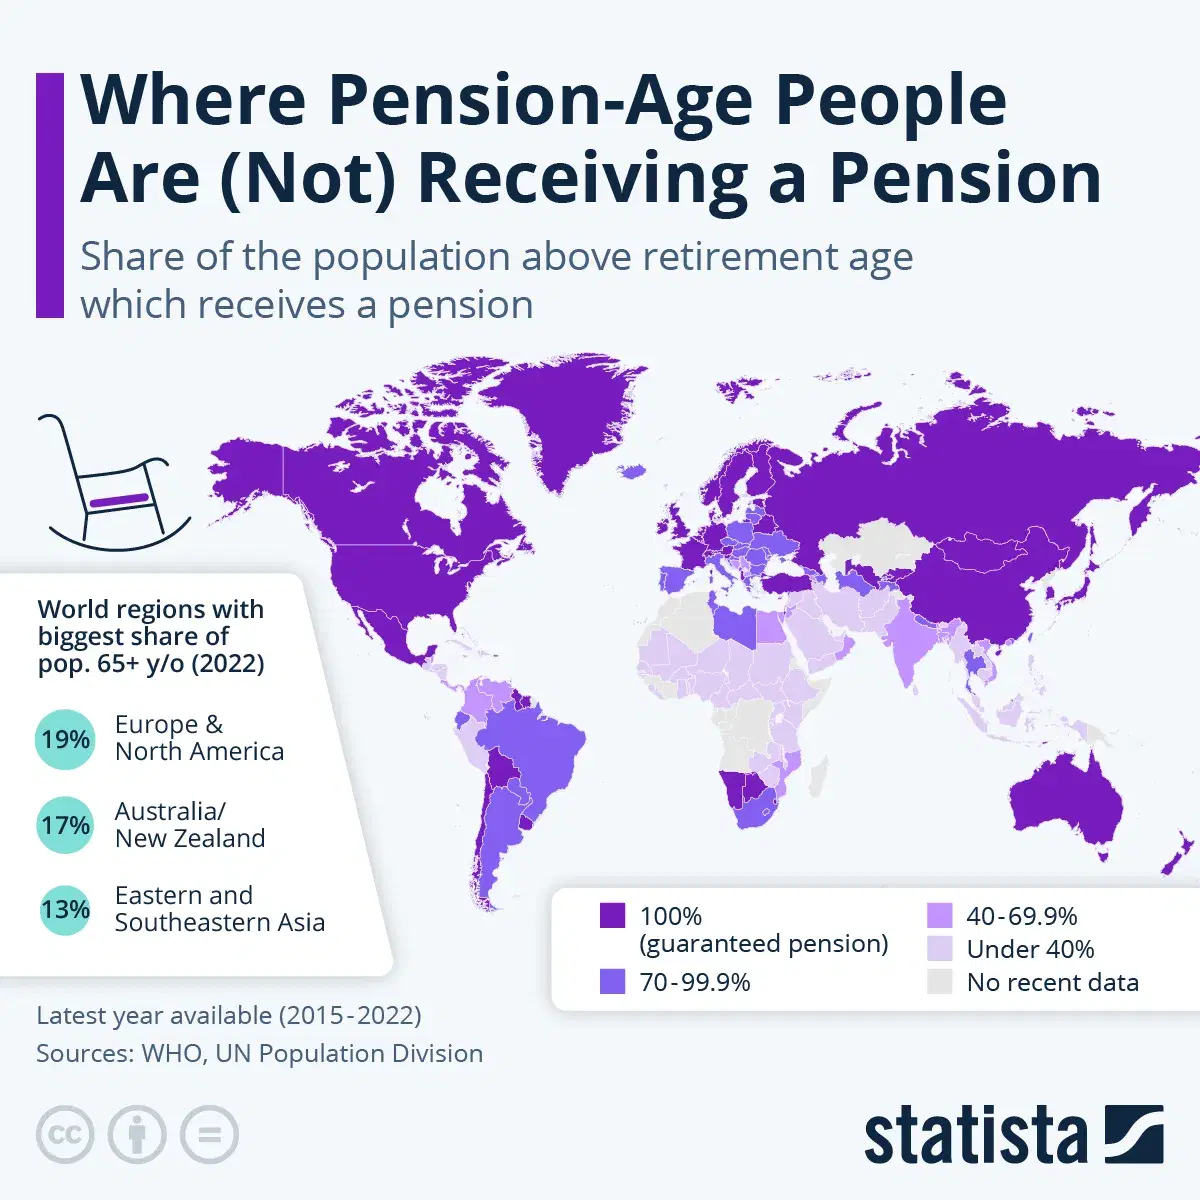 Where Pension-Age People Are (Not) Receiving a Pension